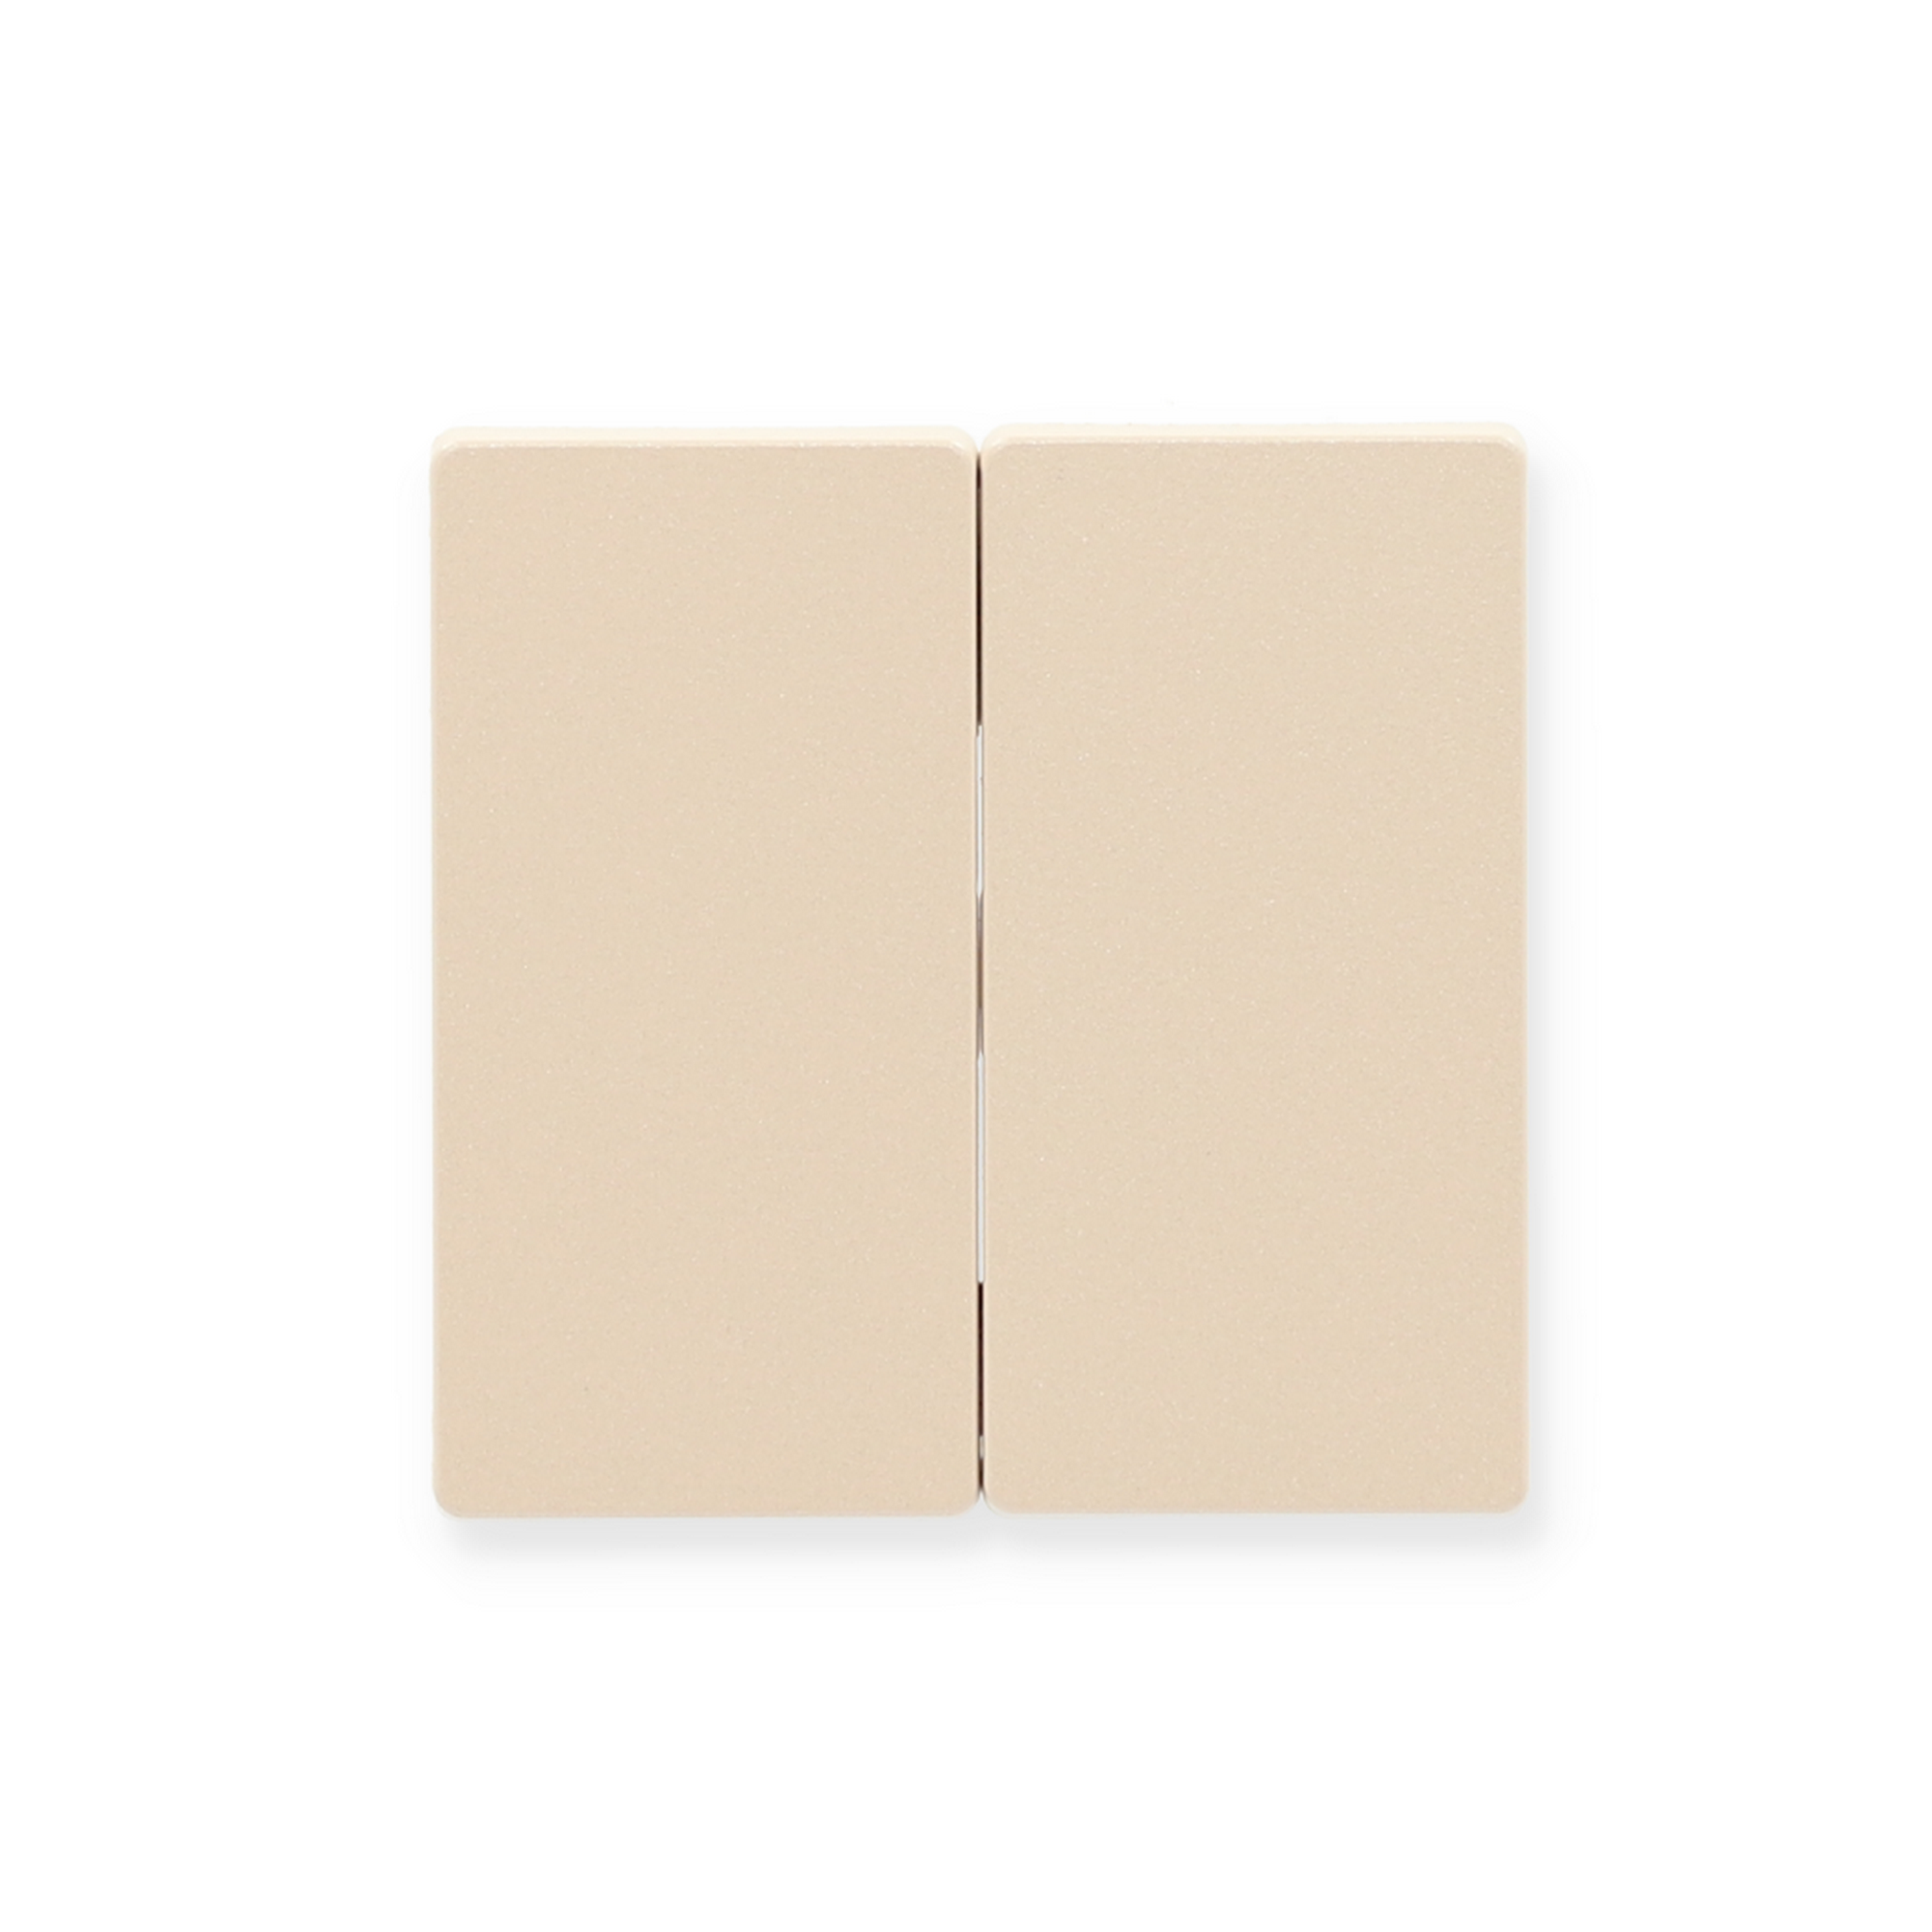 Doppel-Wippe beige 7,1 x 7,1 cm + product picture